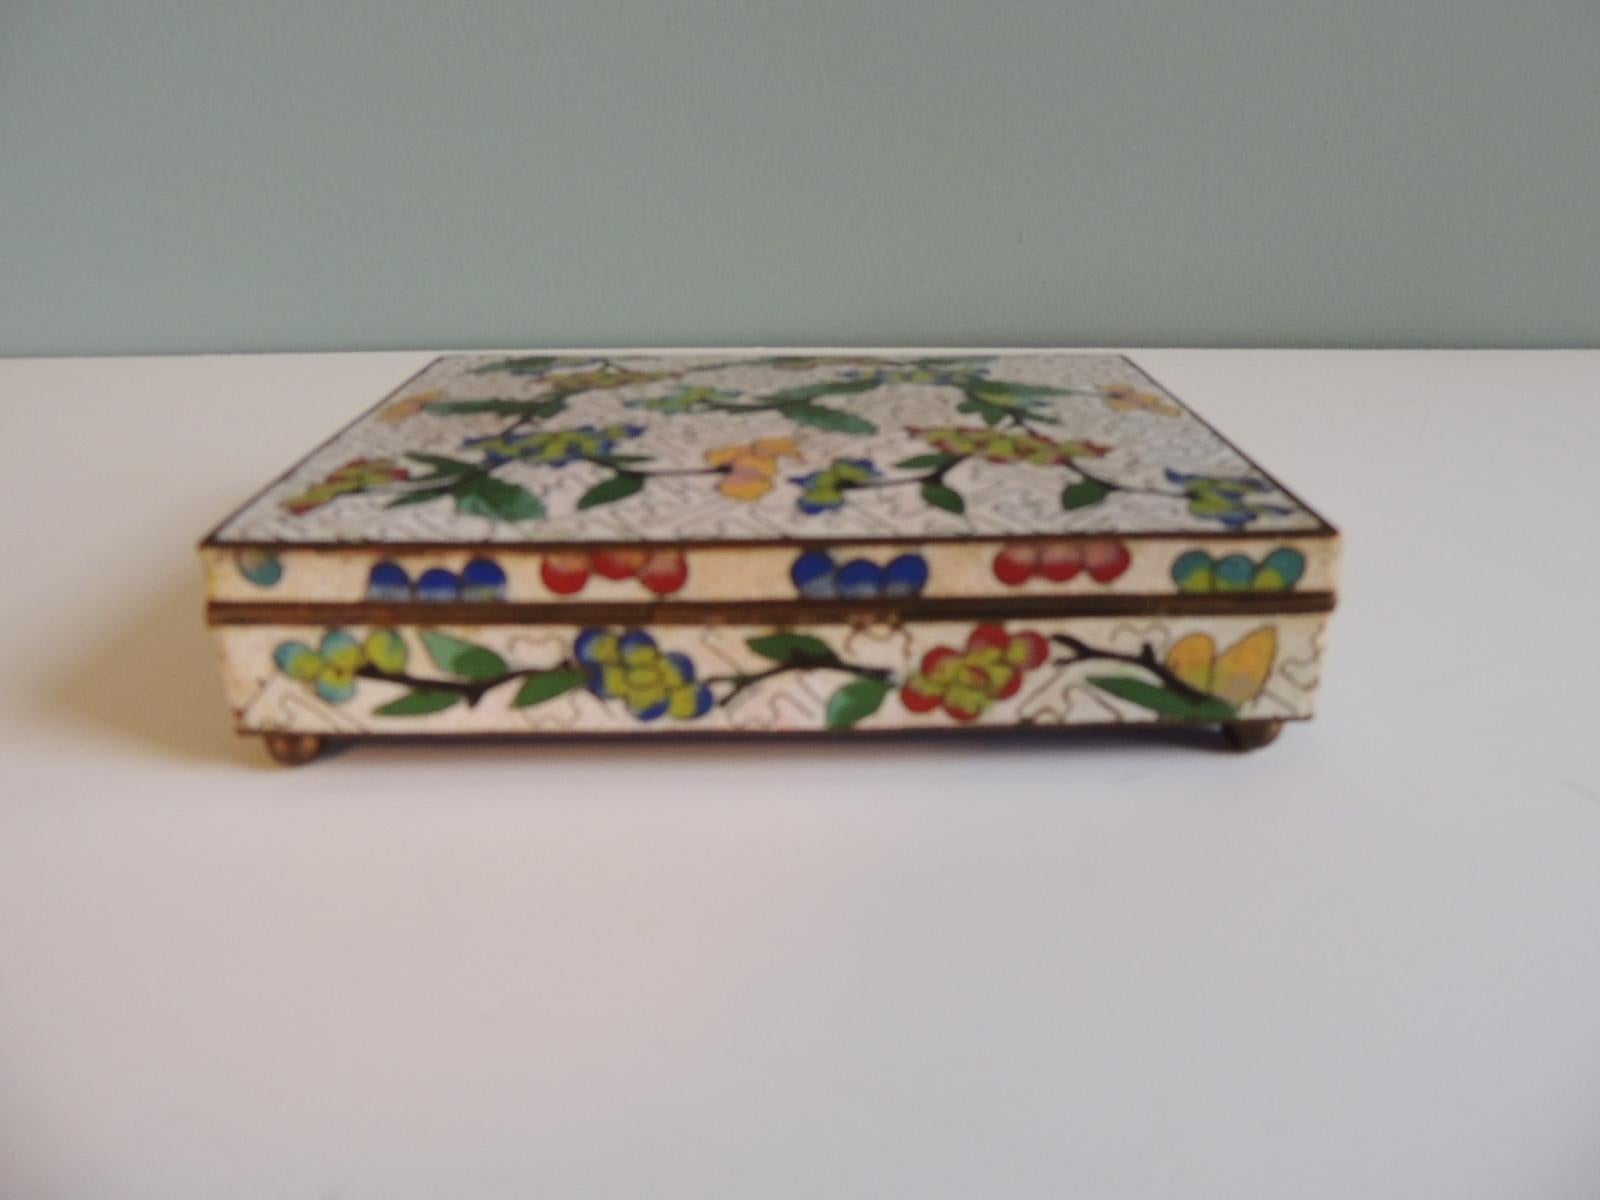 Late 20th Century Vintage Cloisonné Brass and Enamel Decorative Footed Box Depicting Flowers